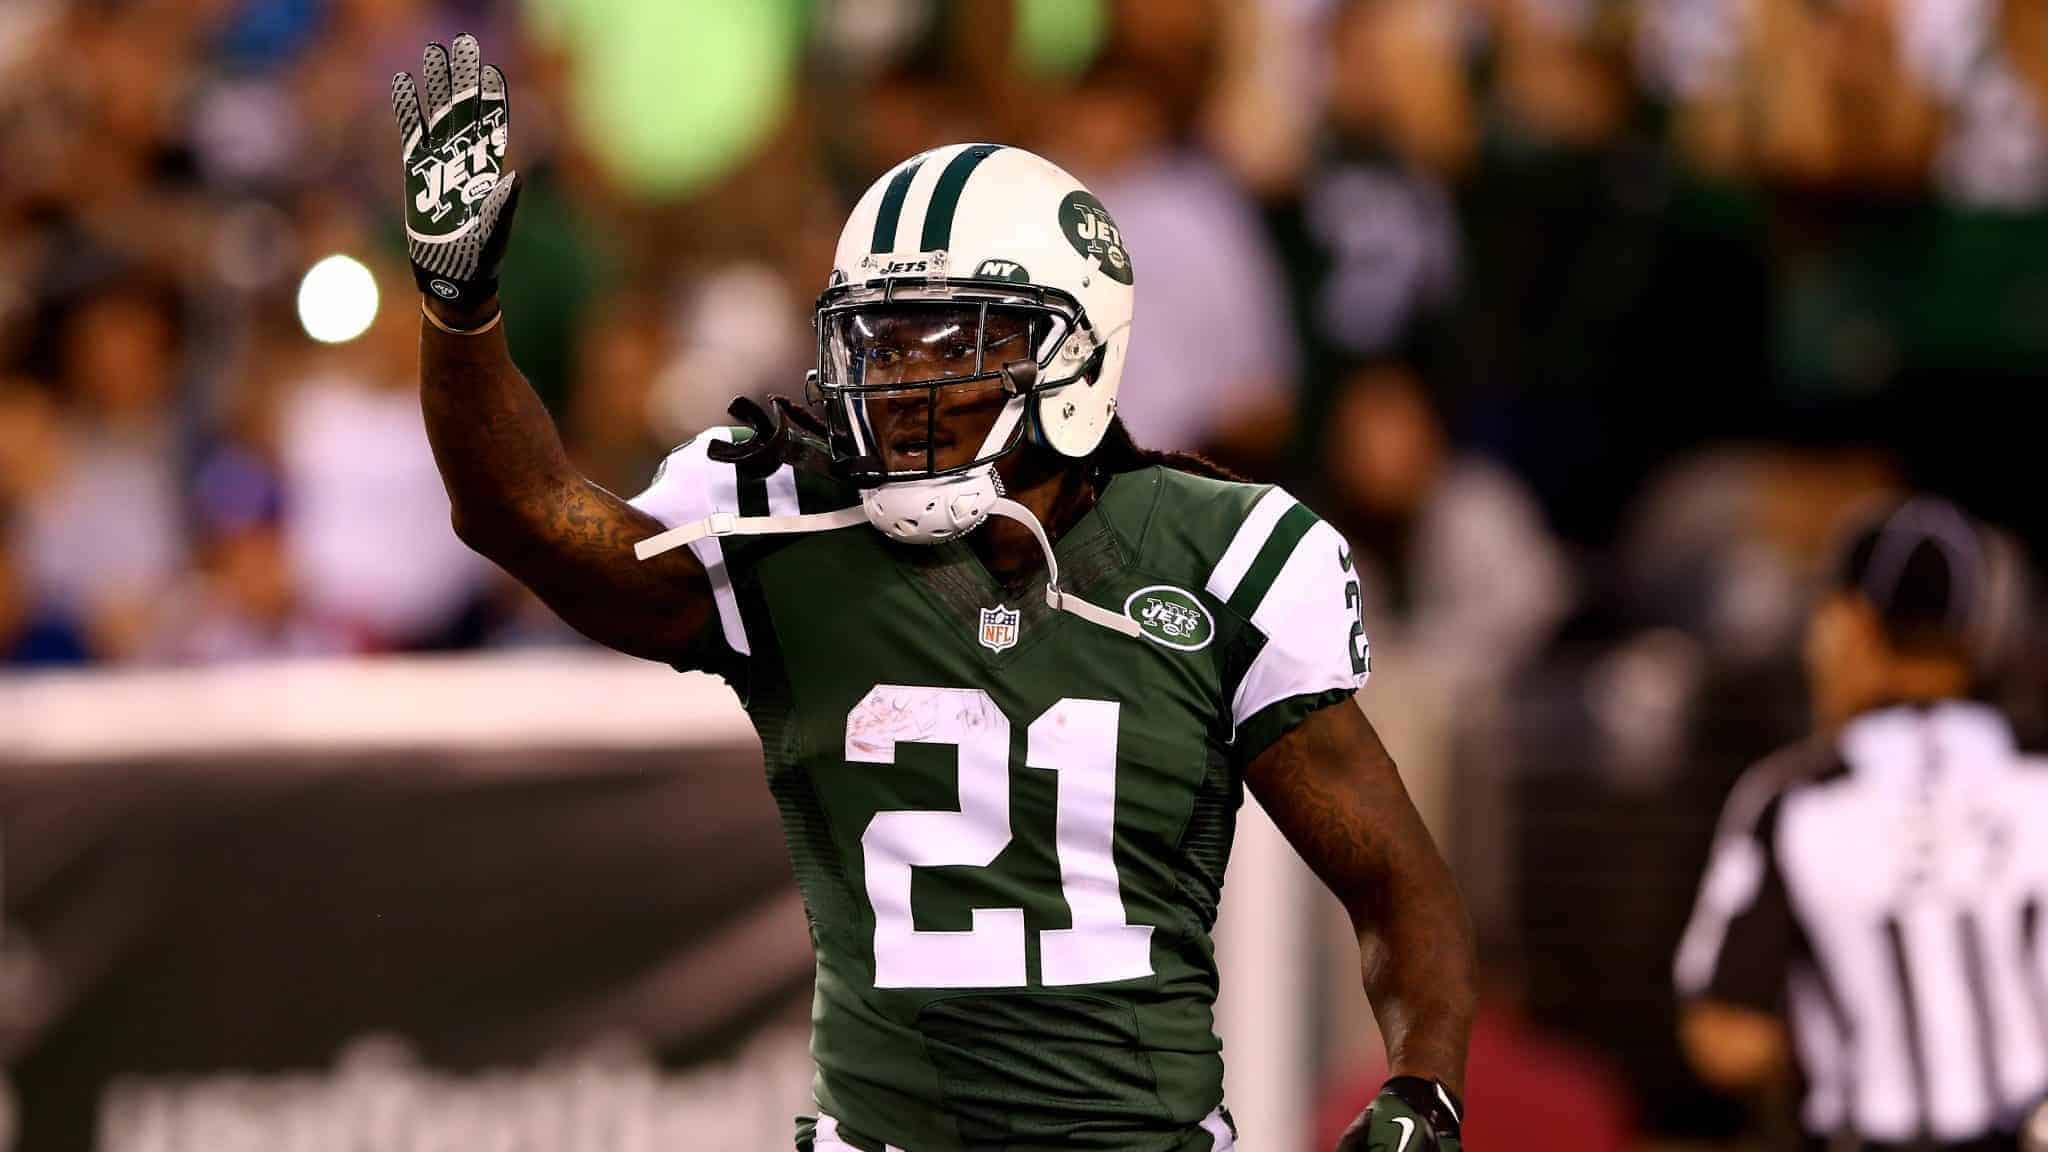 EAST RUTHERFORD, NJ - AUGUST 07: Running back Chris Johnson #21 of the New York Jets celebrates a touchdown against the Indianapolis Colts in the second quarter during a preseason game at MetLife Stadium on August 7, 2014 in East Rutherford, New Jersey.